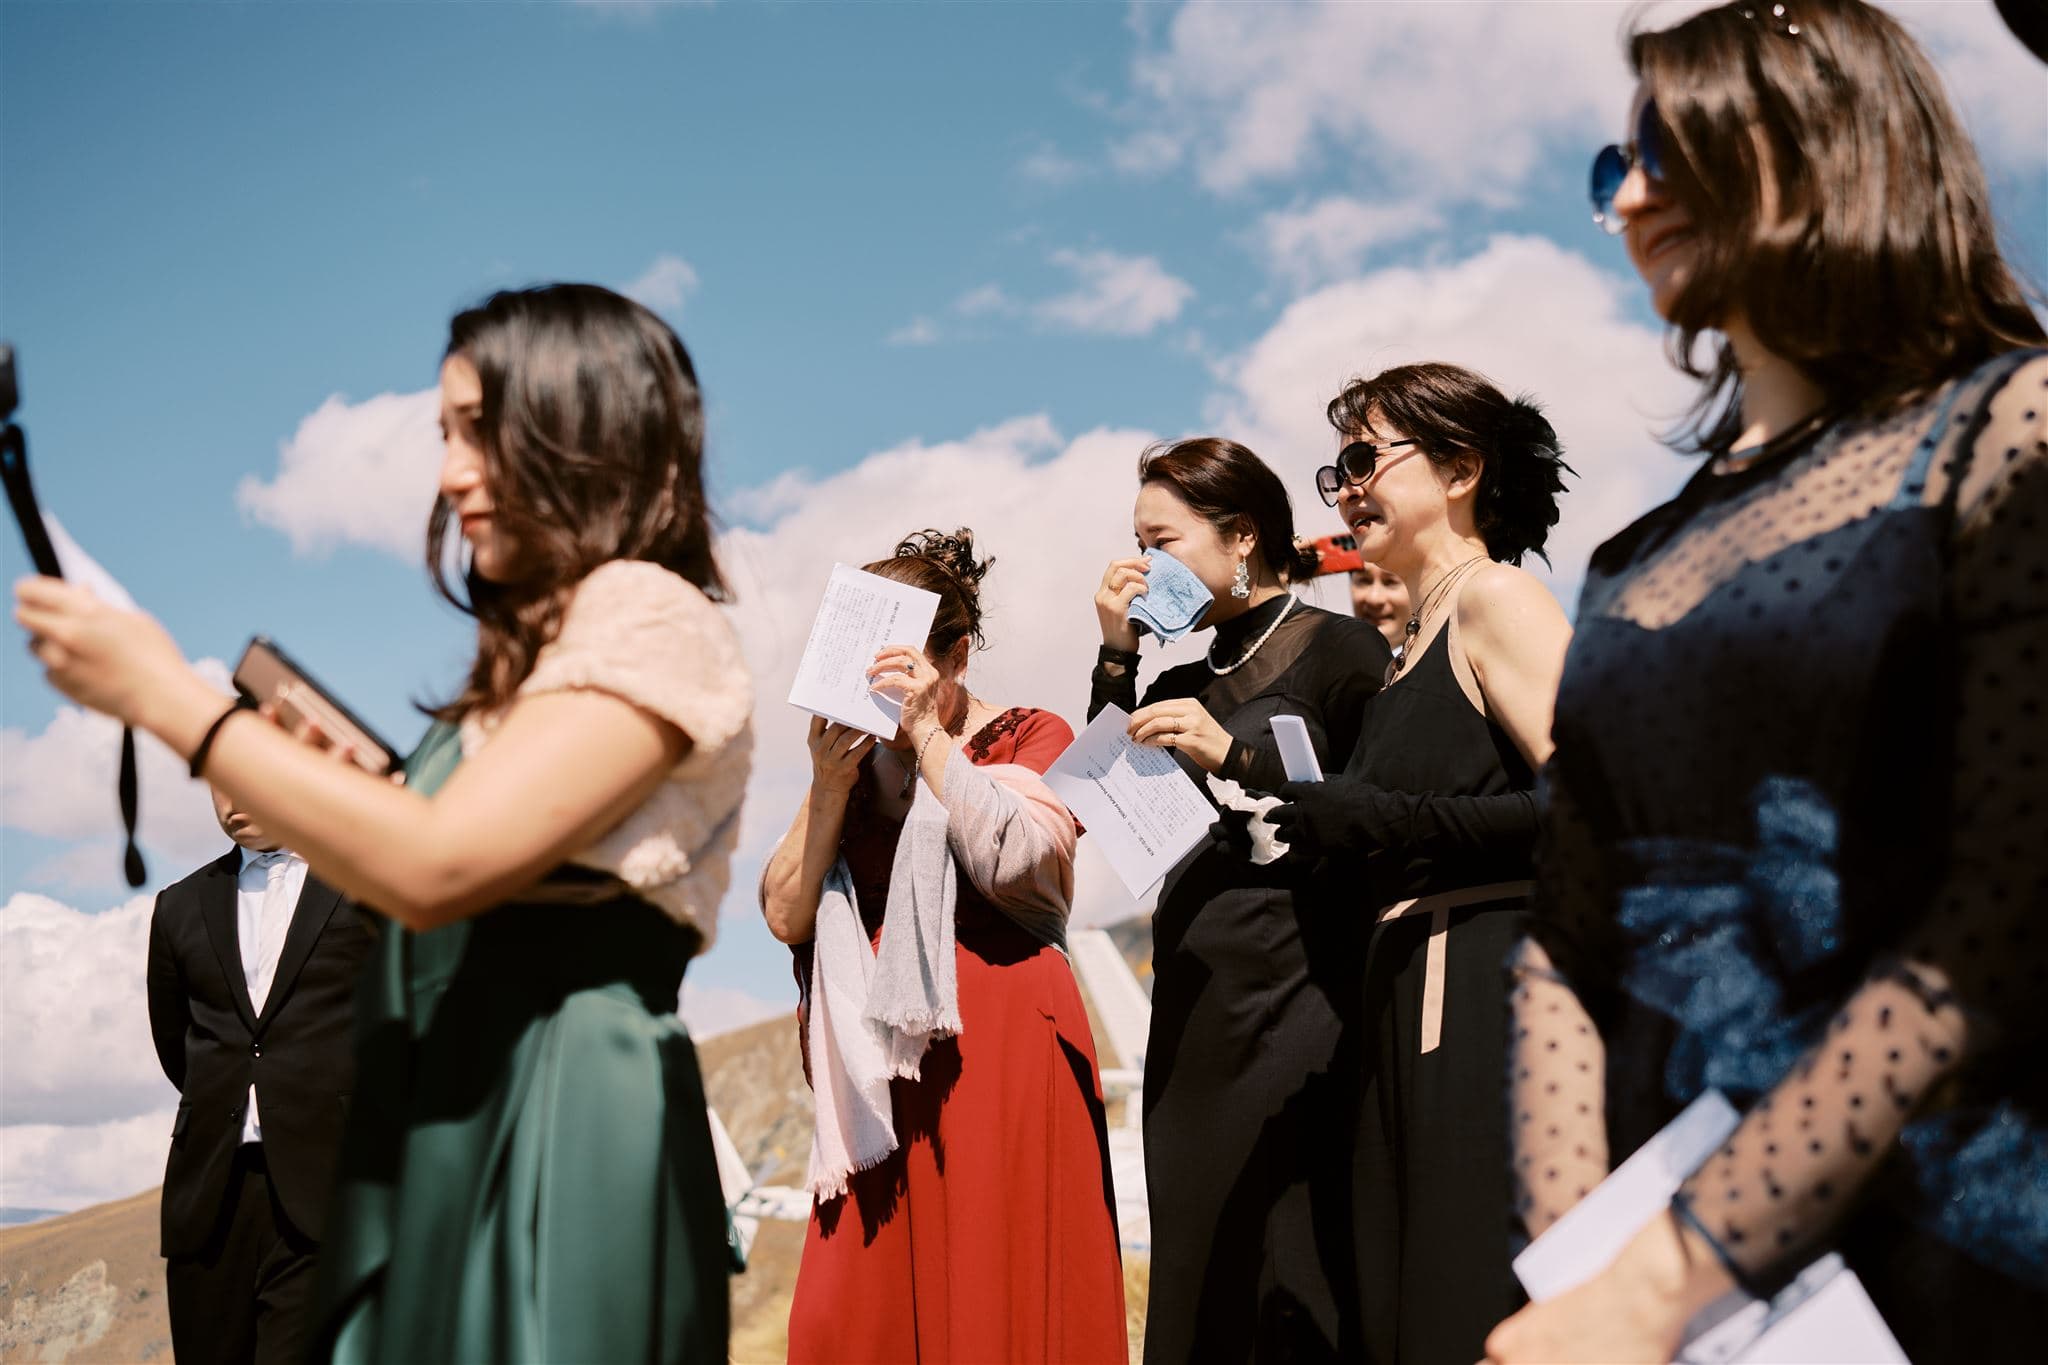 Queenstown New Zealand Heli Wedding Elopement Photographer クイーンズタウン　ニュージーランド　エロープメント 結婚式 | A group of formally dressed women gathered outdoors, one wiping tears with a tissue, as the Wedding Photographer captures every moment.